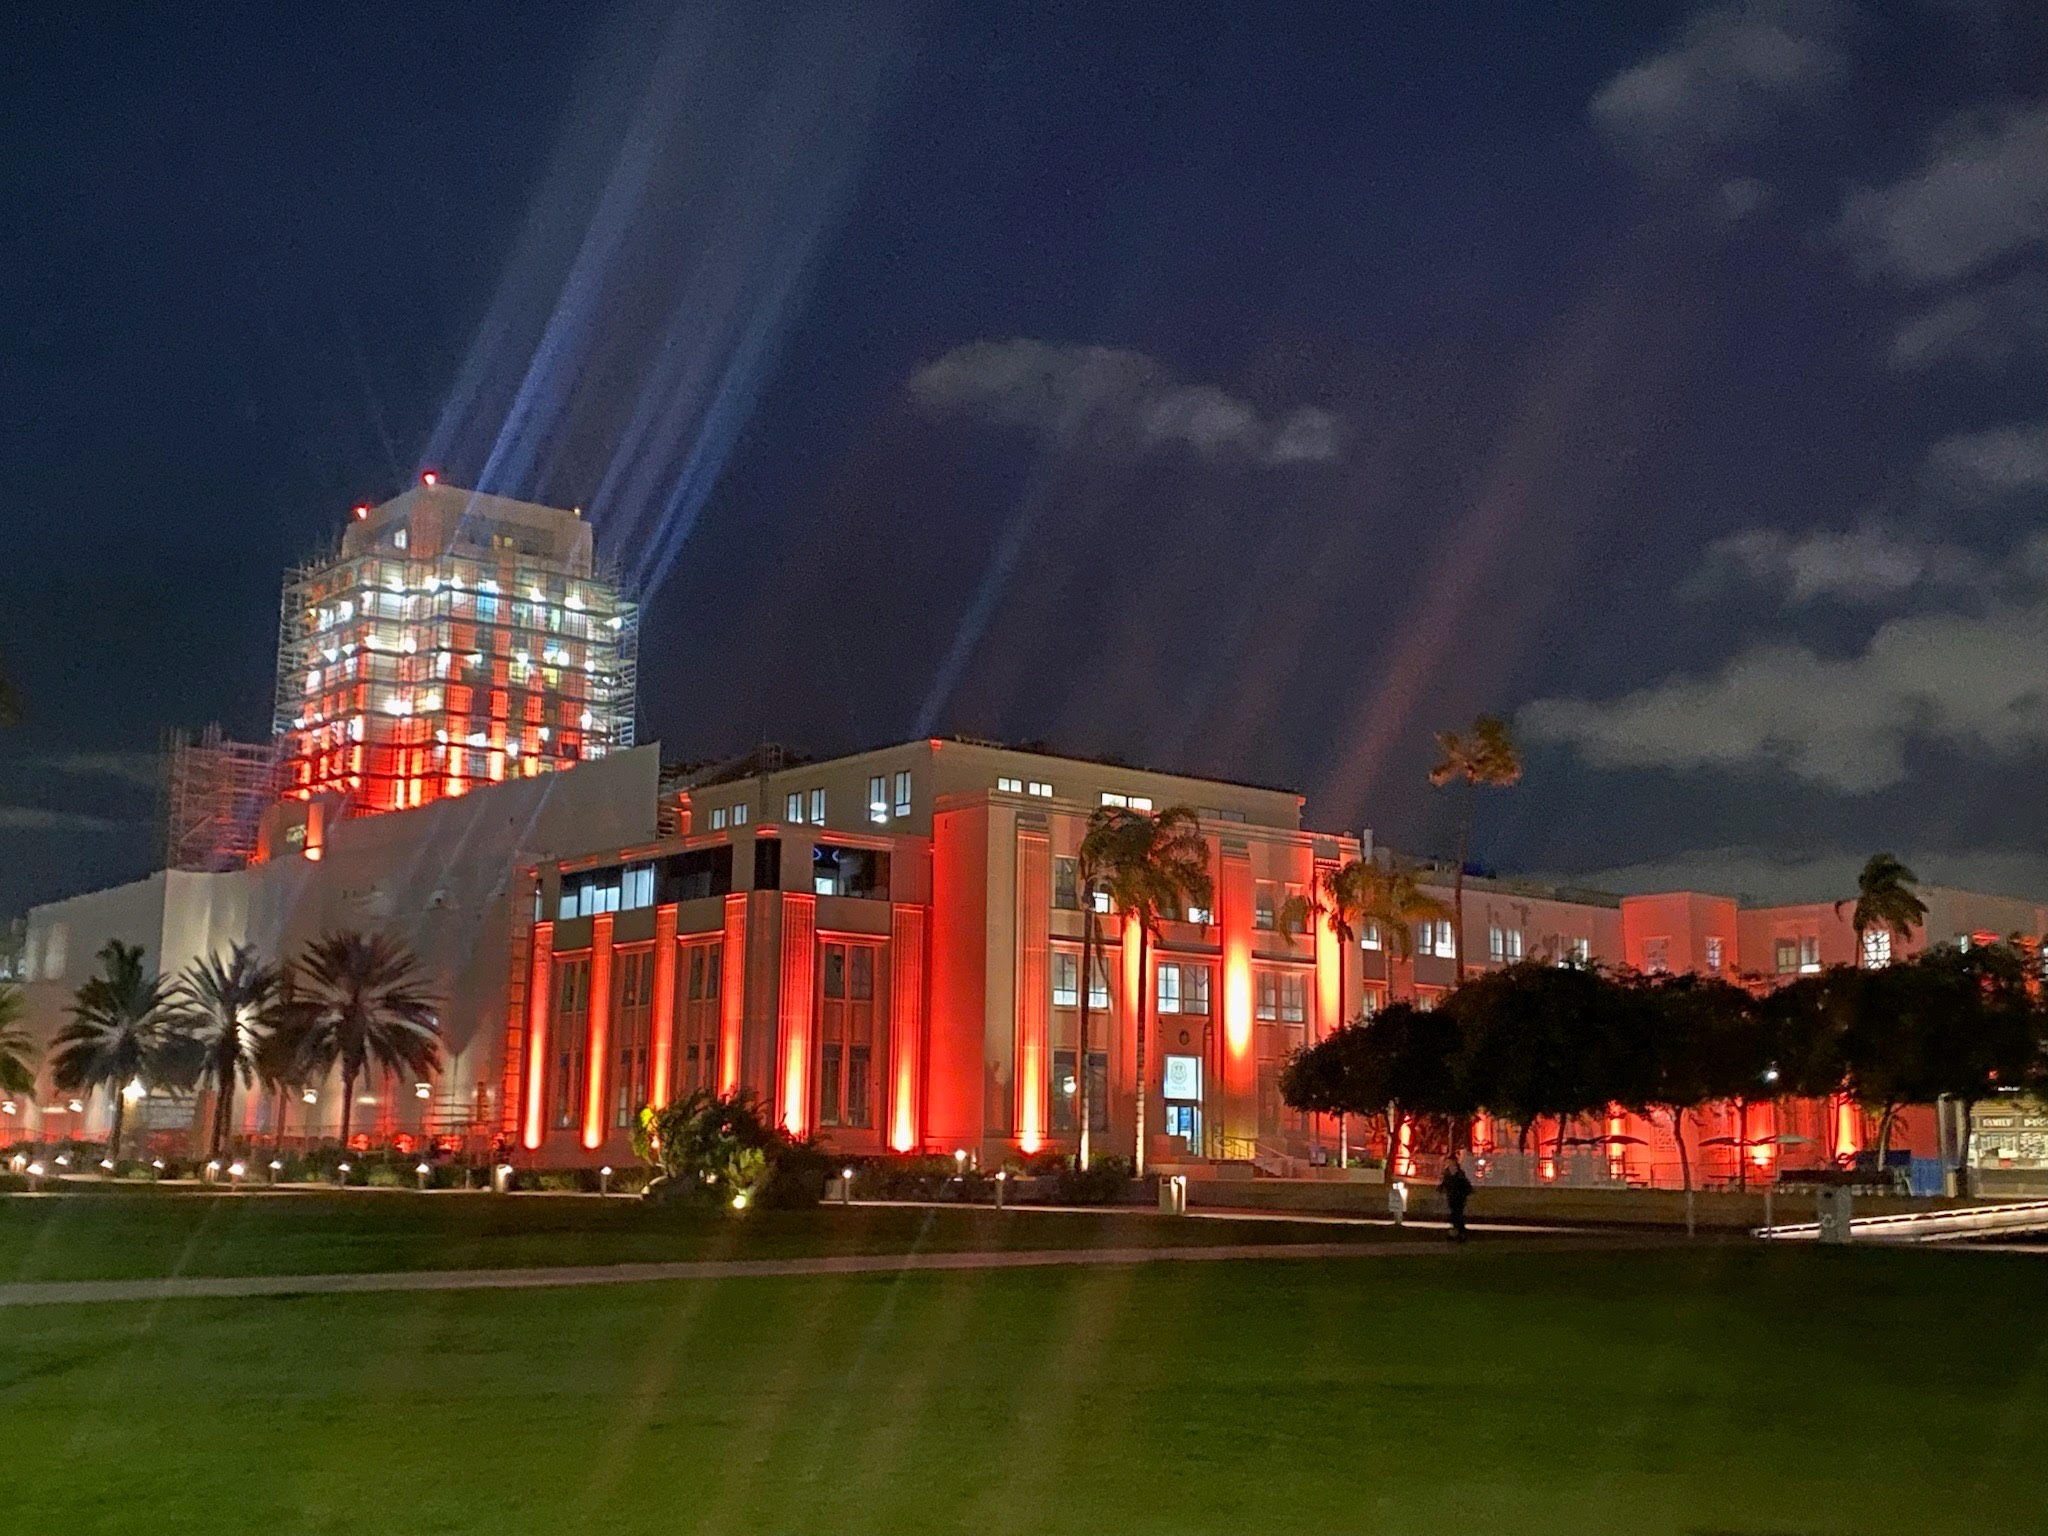 The San Diego County Administration Building, a large rectangular building, is shown beneath a partly cloudy night sky and is lit with bright neon orange lights across the building’s façade.